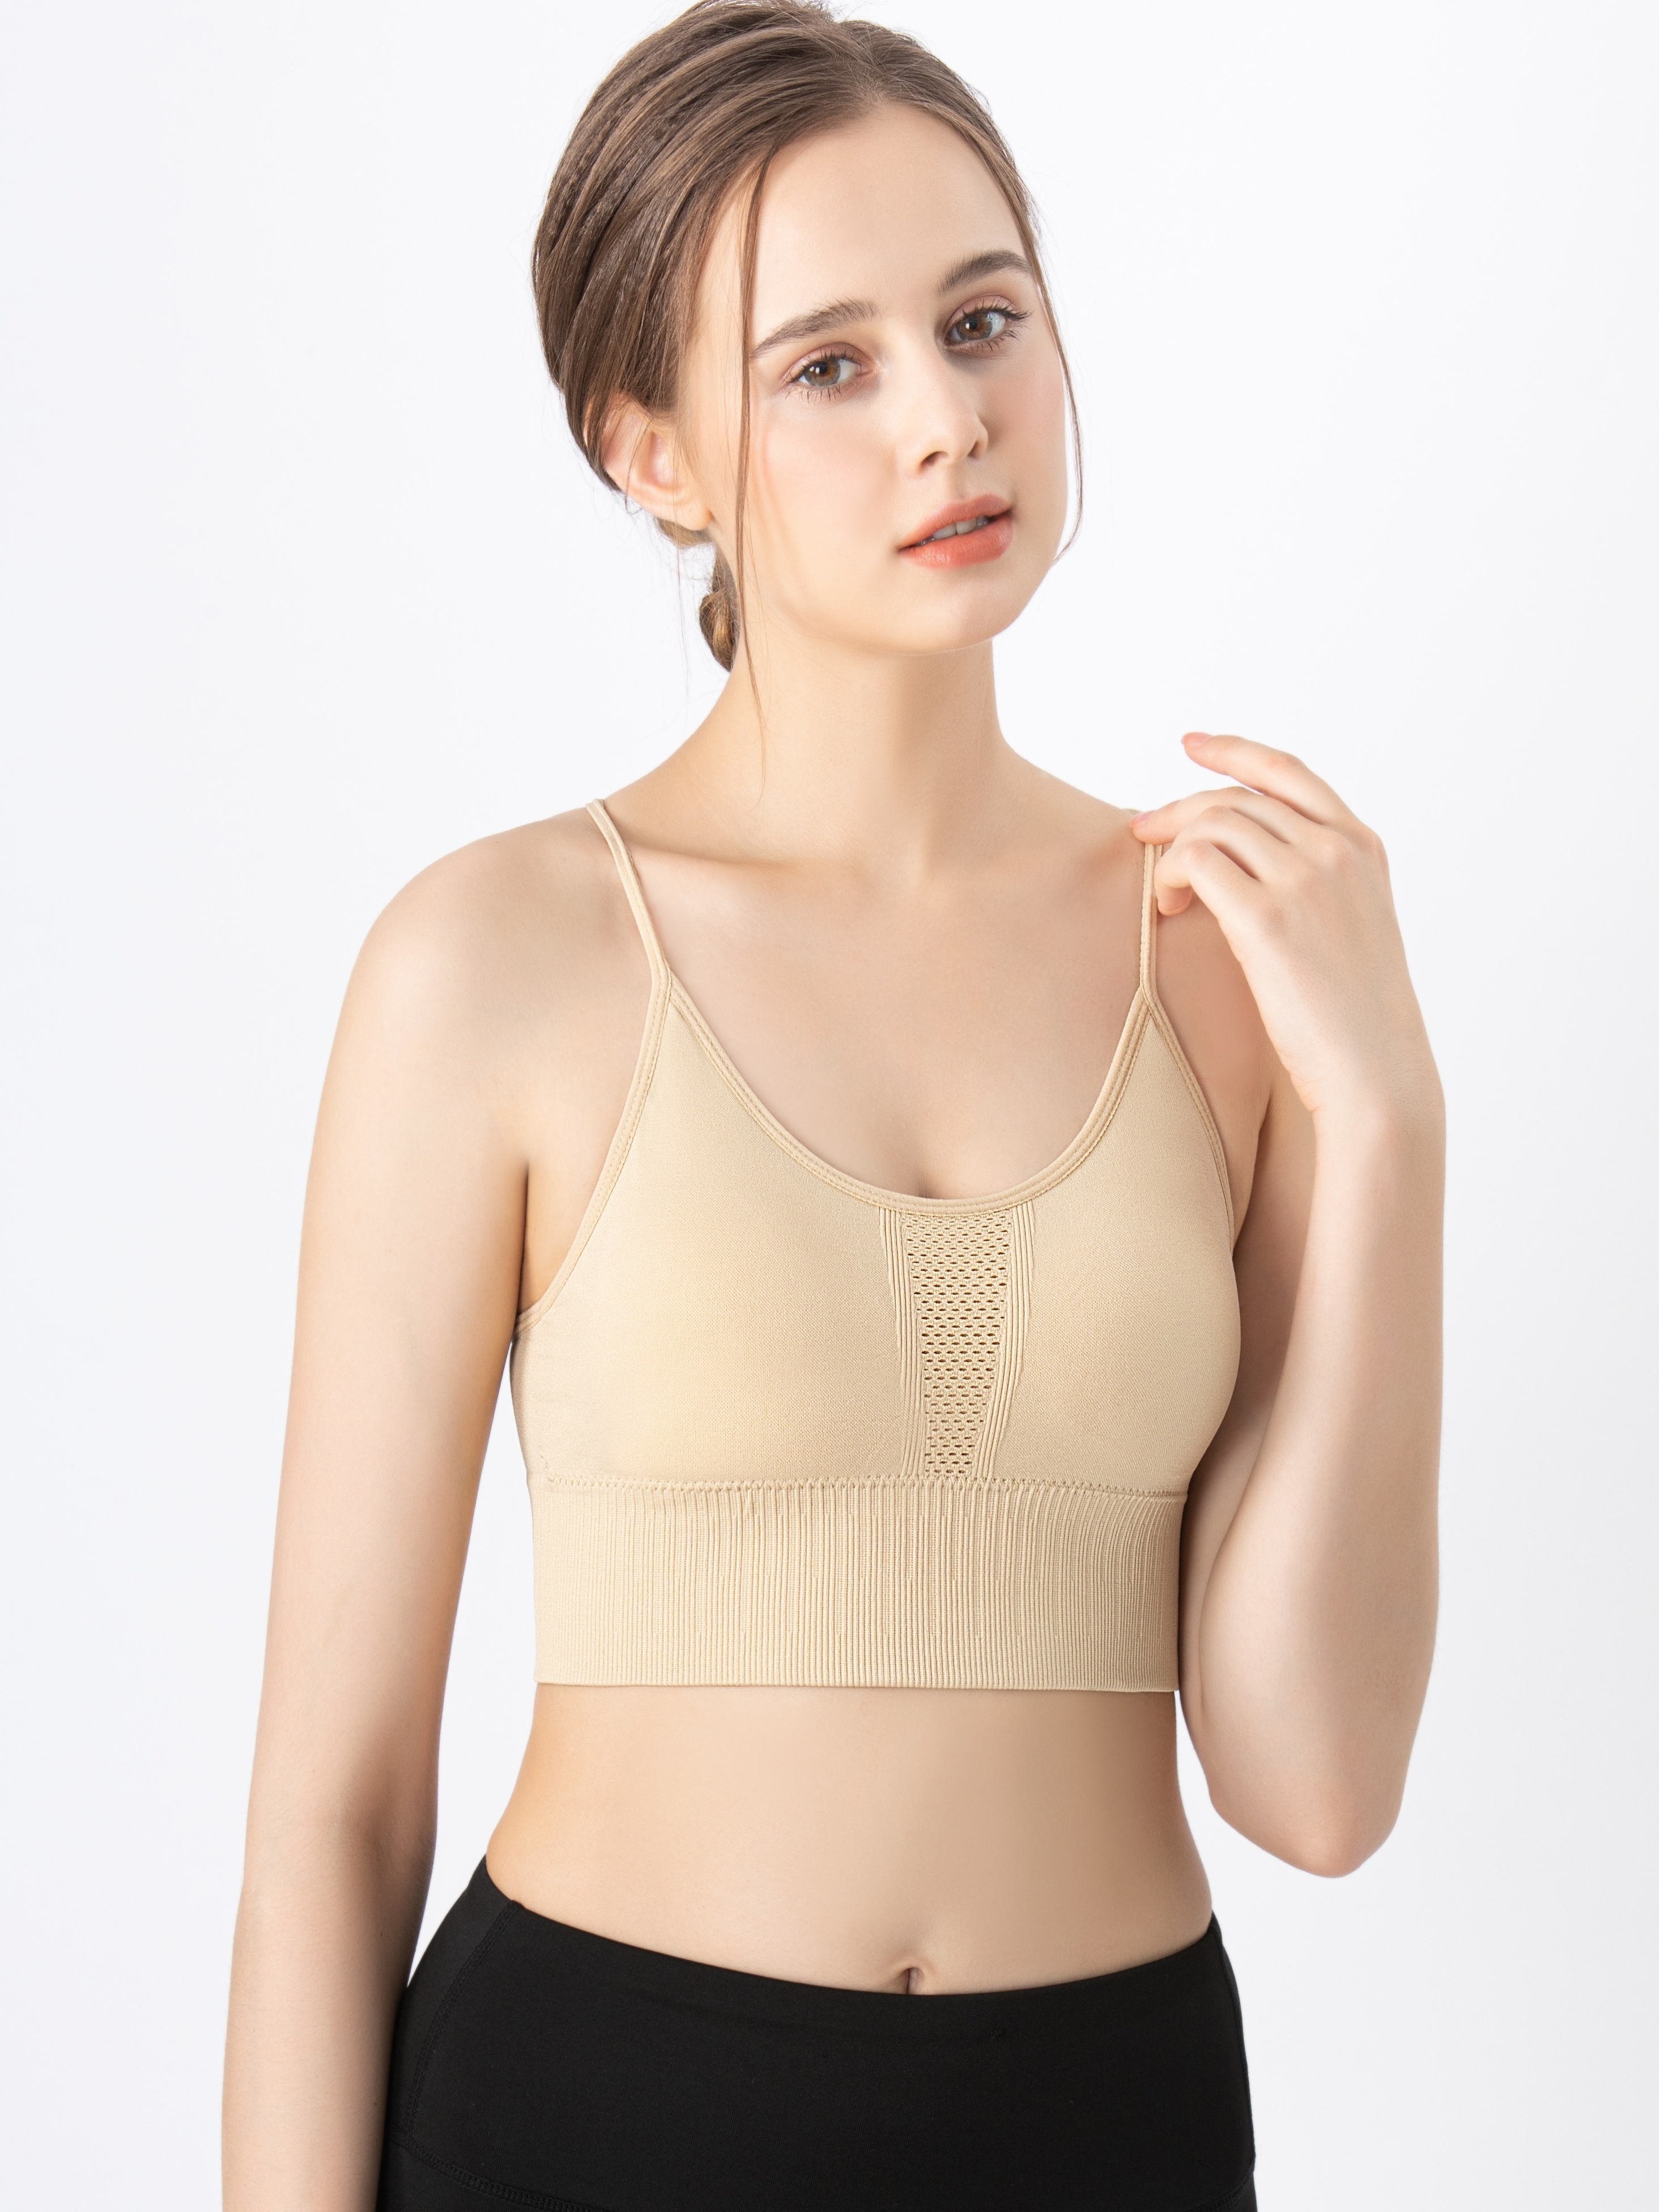 Women's Hunchback Shaping Corrective Strap Underwear Comfortable Front  Button Sports Bra with Mesh Straps Bra (Beige, M) at  Women's  Clothing store